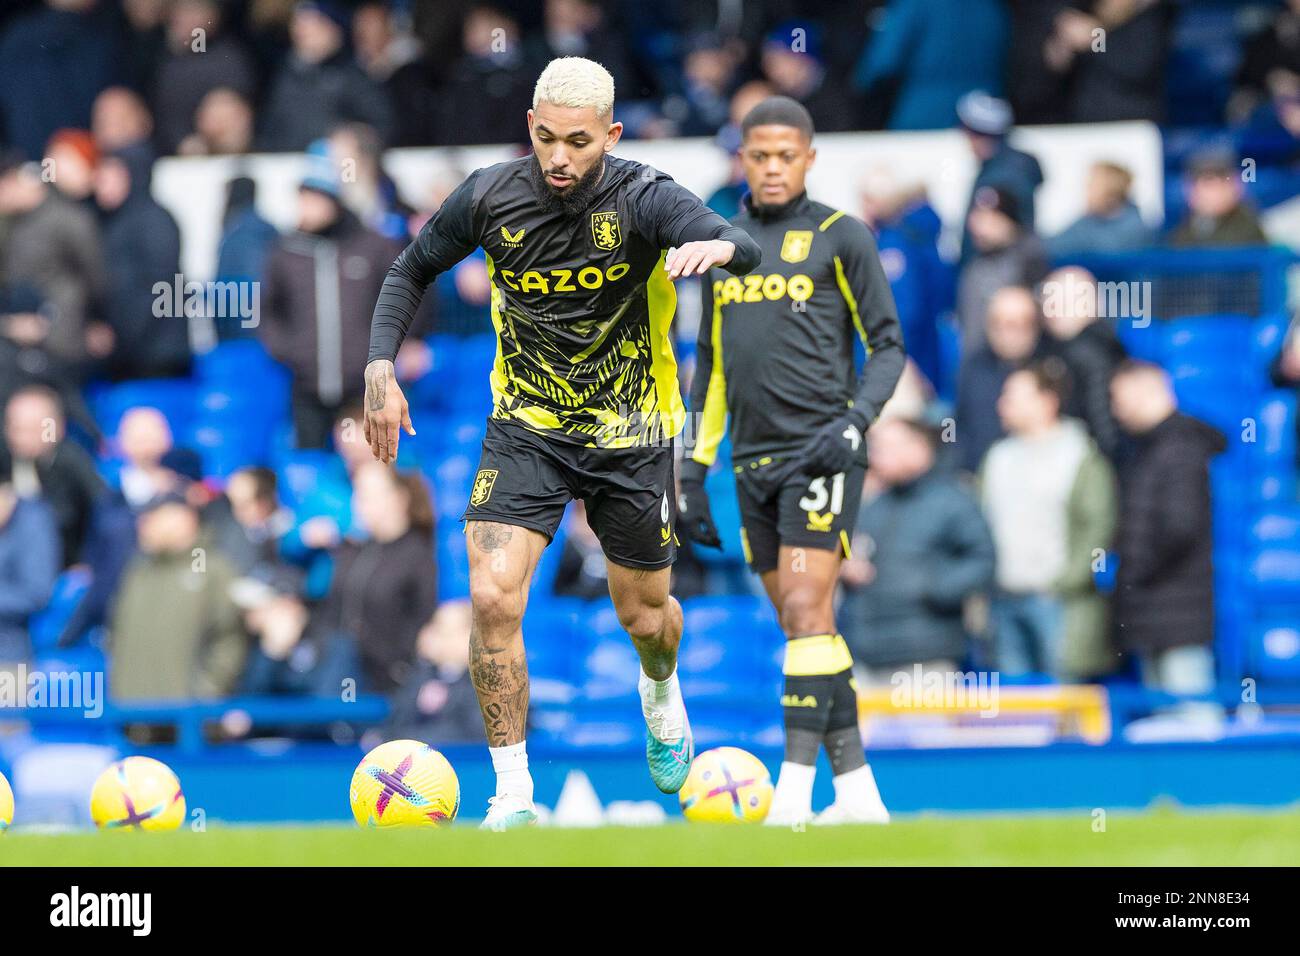 Liverpool, UK. 25th Feb 2023. Douglas Luiz #6 of Aston Villa warms up during the Premier League match between Everton and Aston Villa at Goodison Park, Liverpool on Saturday 25th February 2023. (Photo: Mike Morese | MI News) Credit: MI News & Sport /Alamy Live News Stock Photo